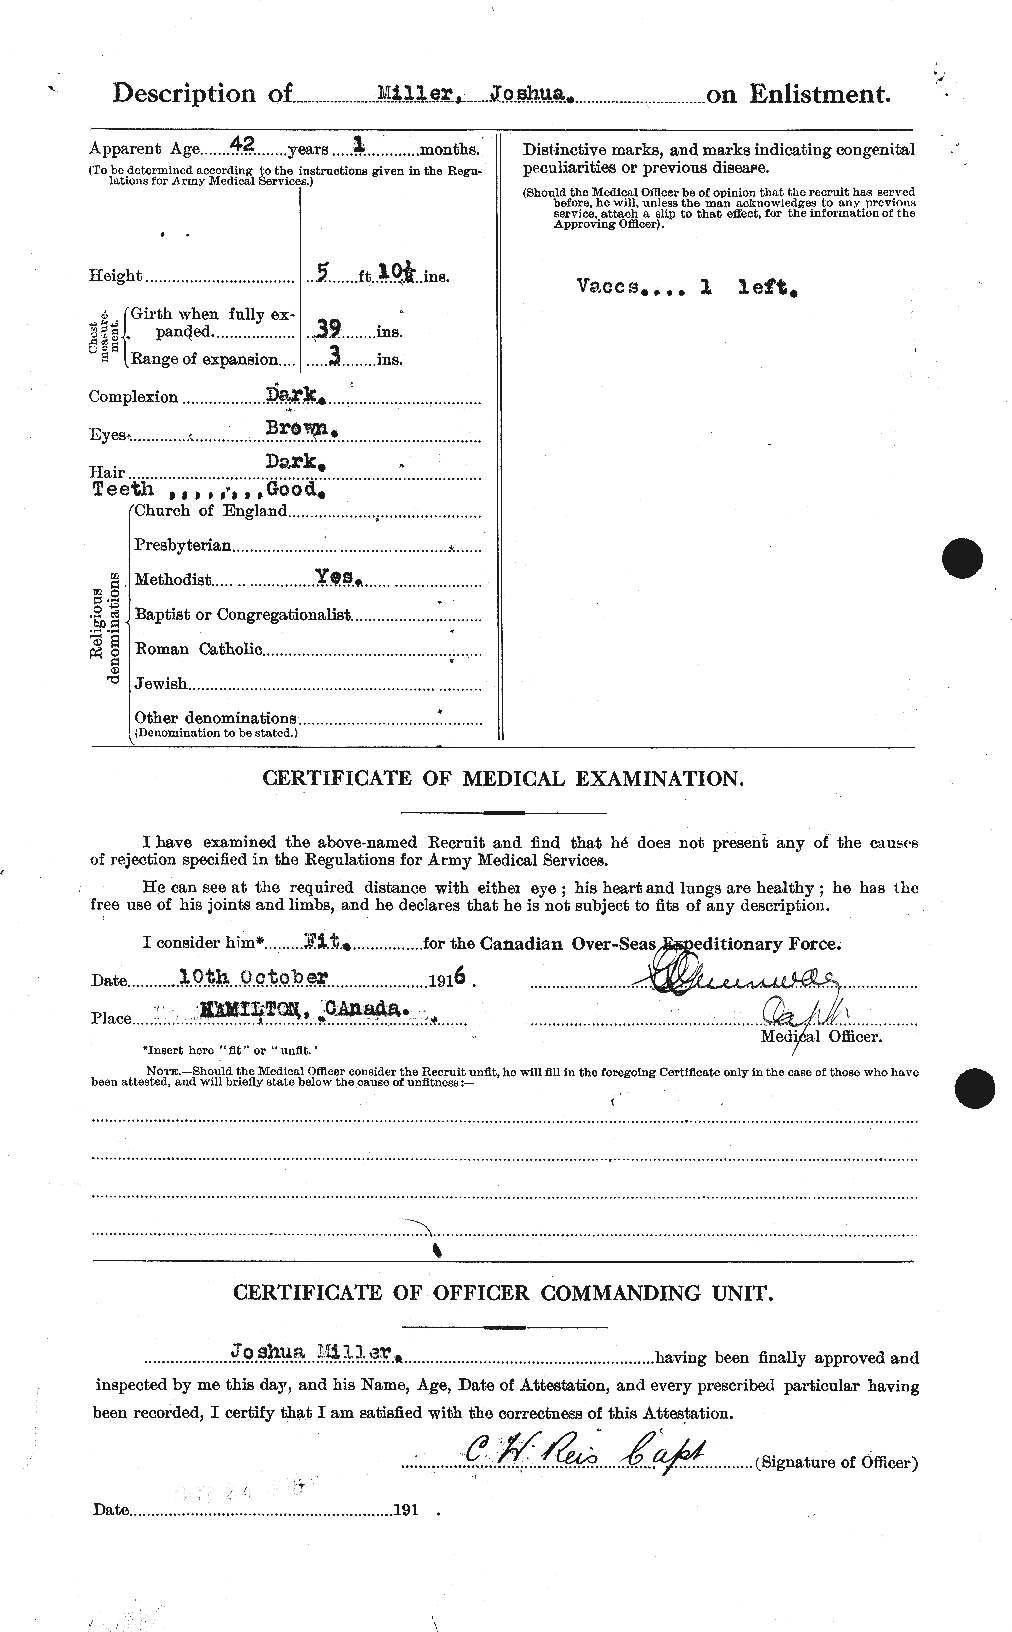 Personnel Records of the First World War - CEF 499475b